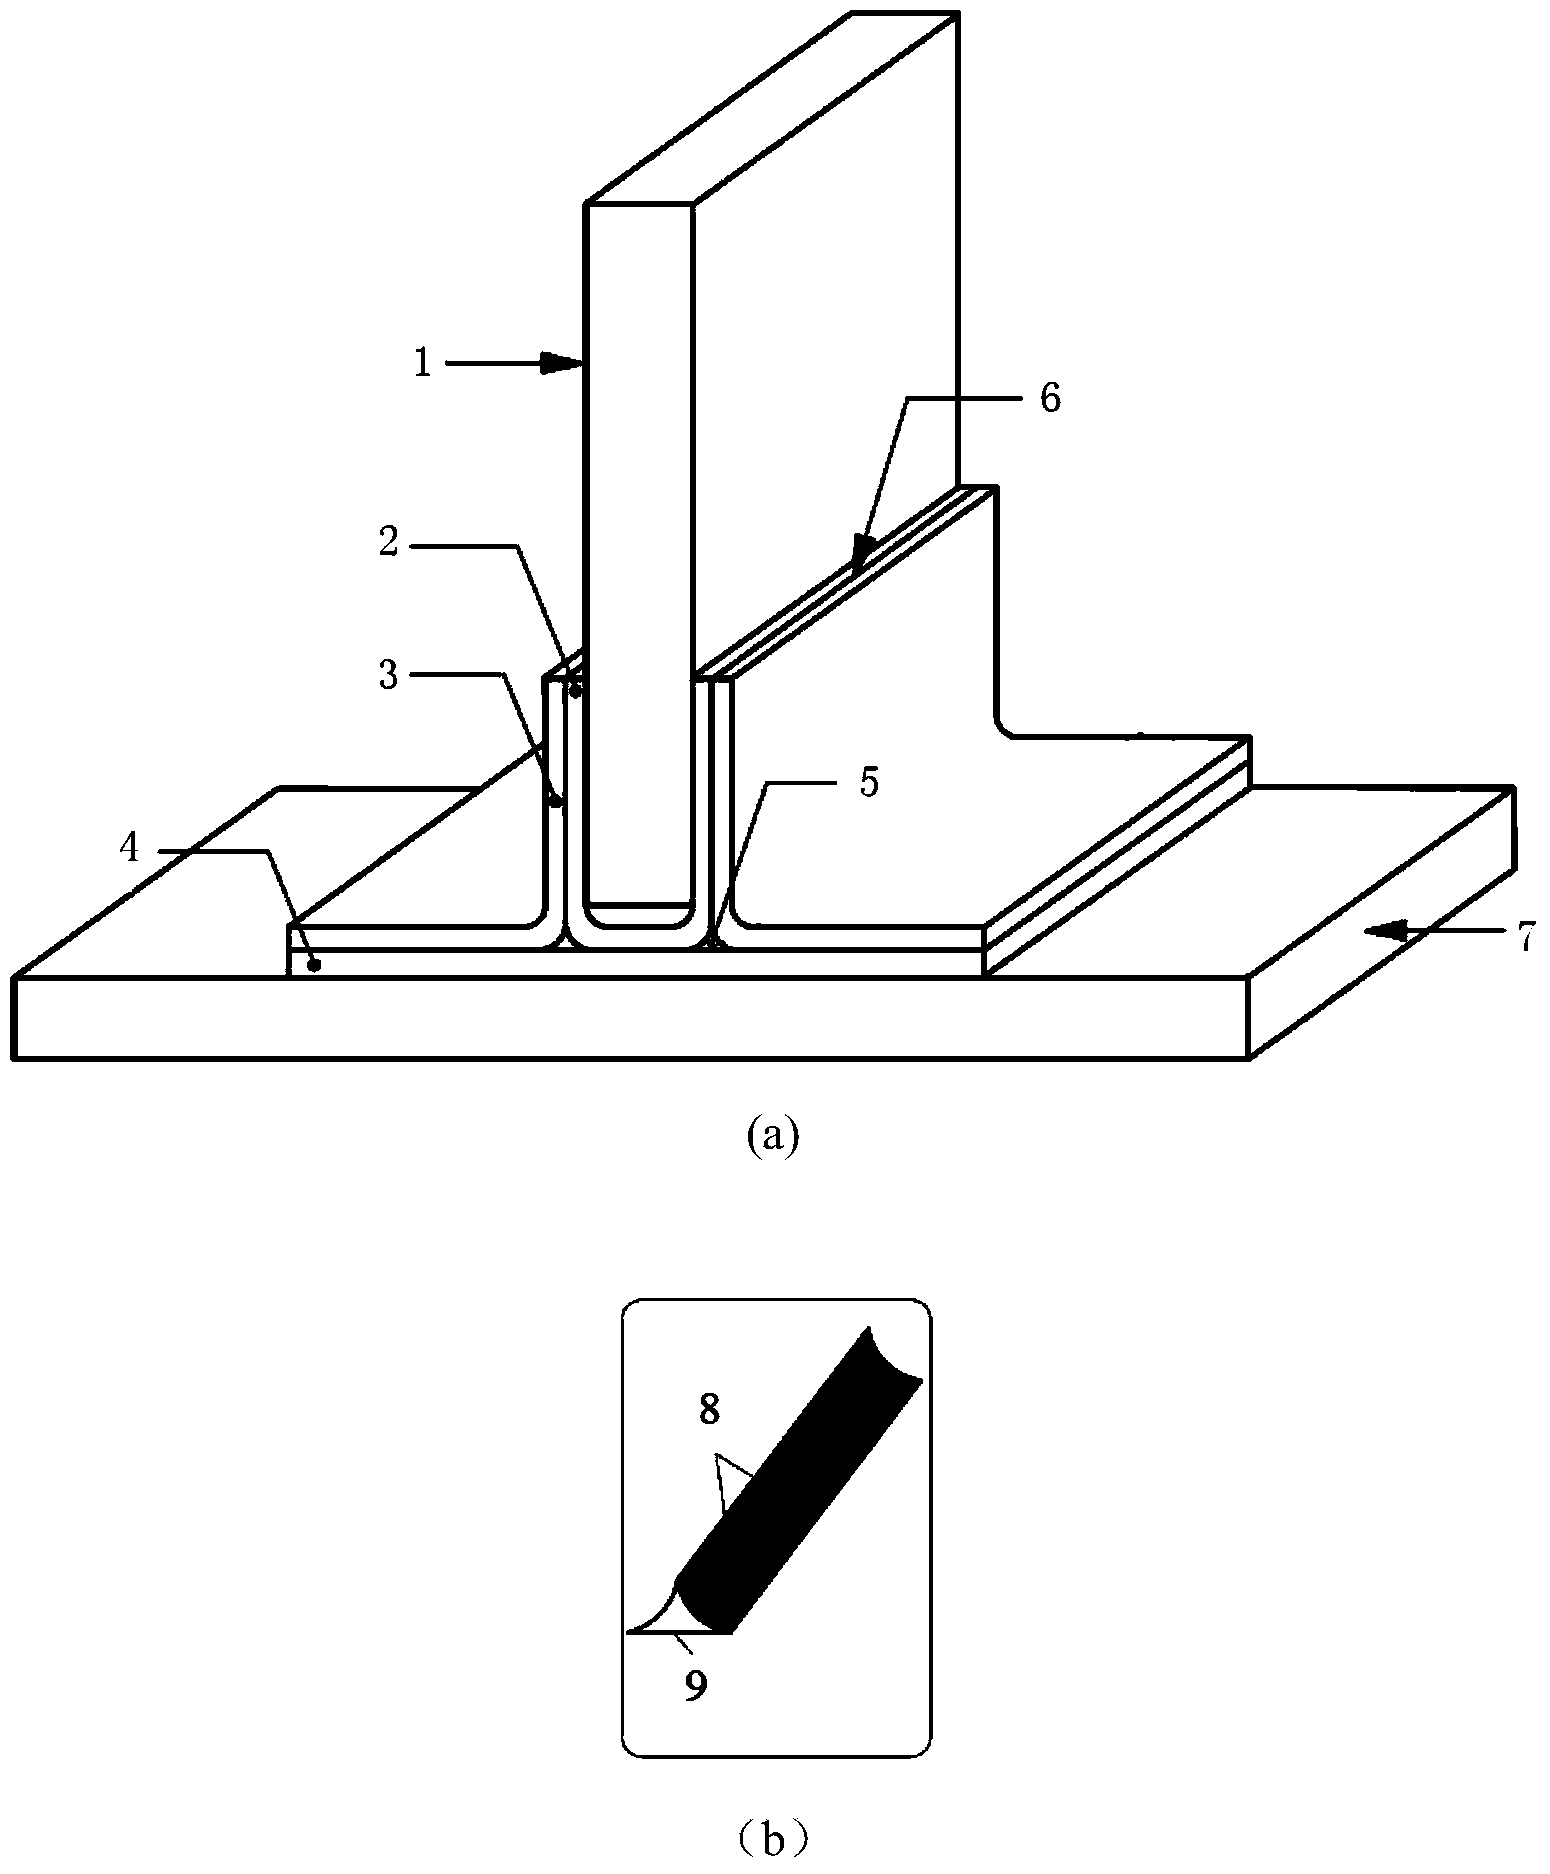 Composite material Pi-shaped gluing connection structure tensile strength prediction method based on average invalidation index